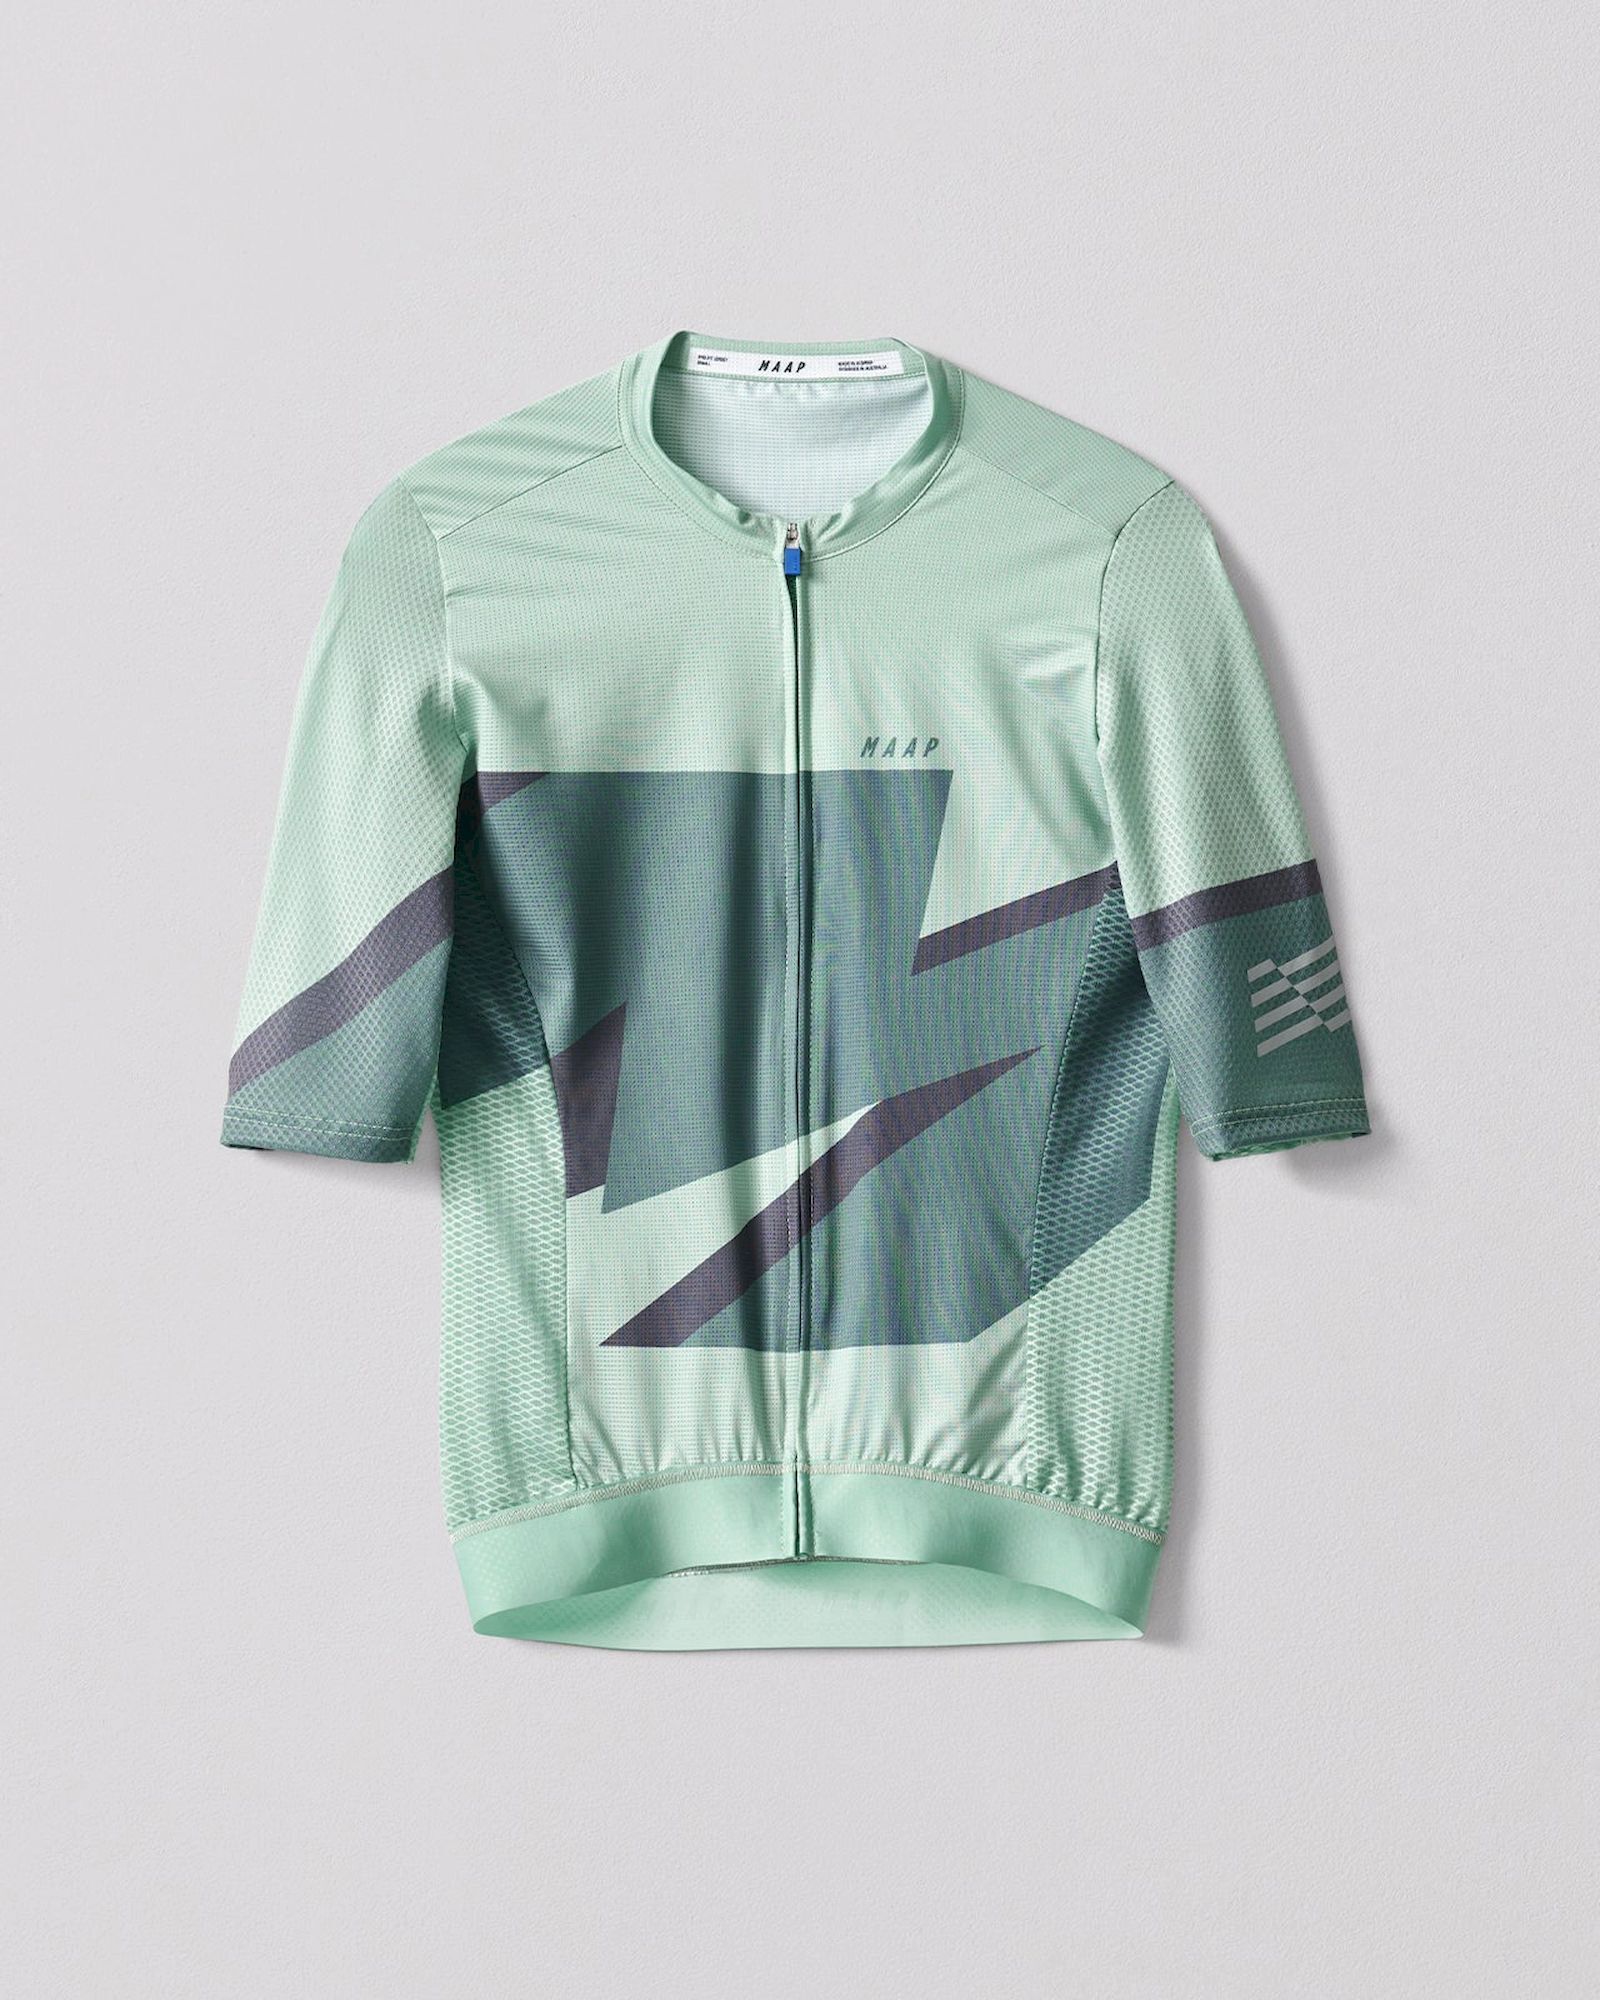 Maap Evolve 3D Pro Air Jersey - Maglia ciclismo - Uomo | Hardloop